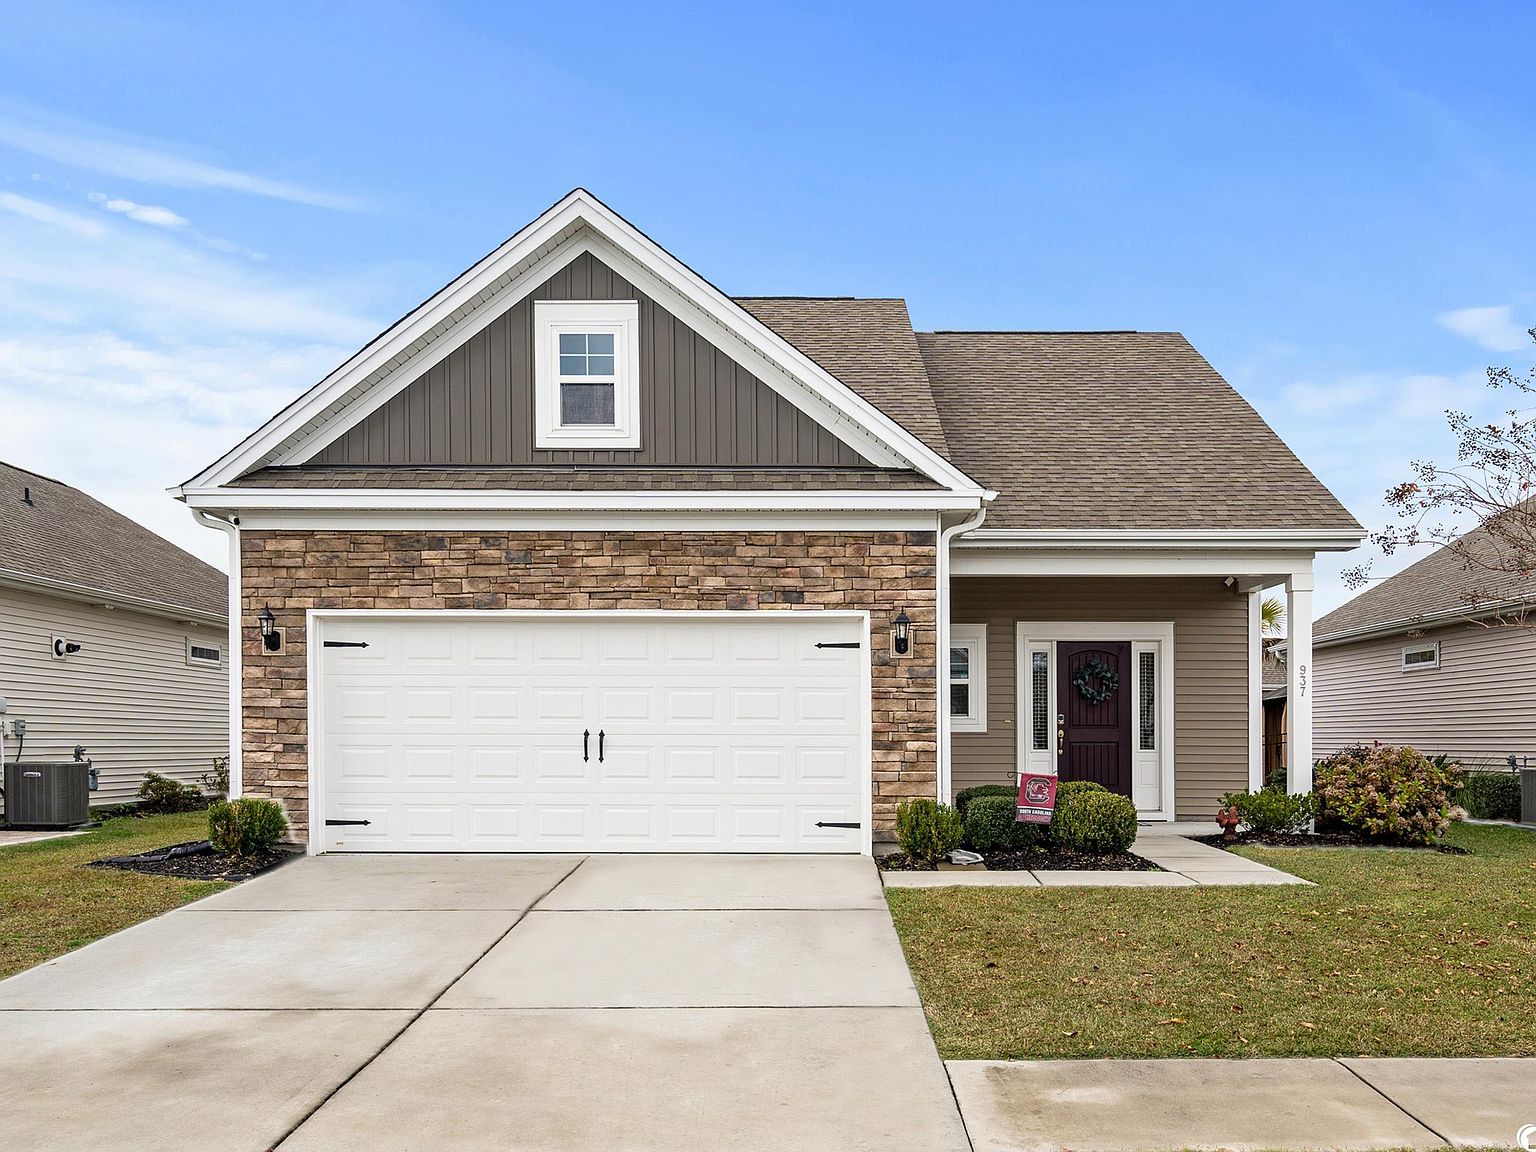 937 Witherbee Way, Little River, SC 29566 | MLS #2324154 | Zillow